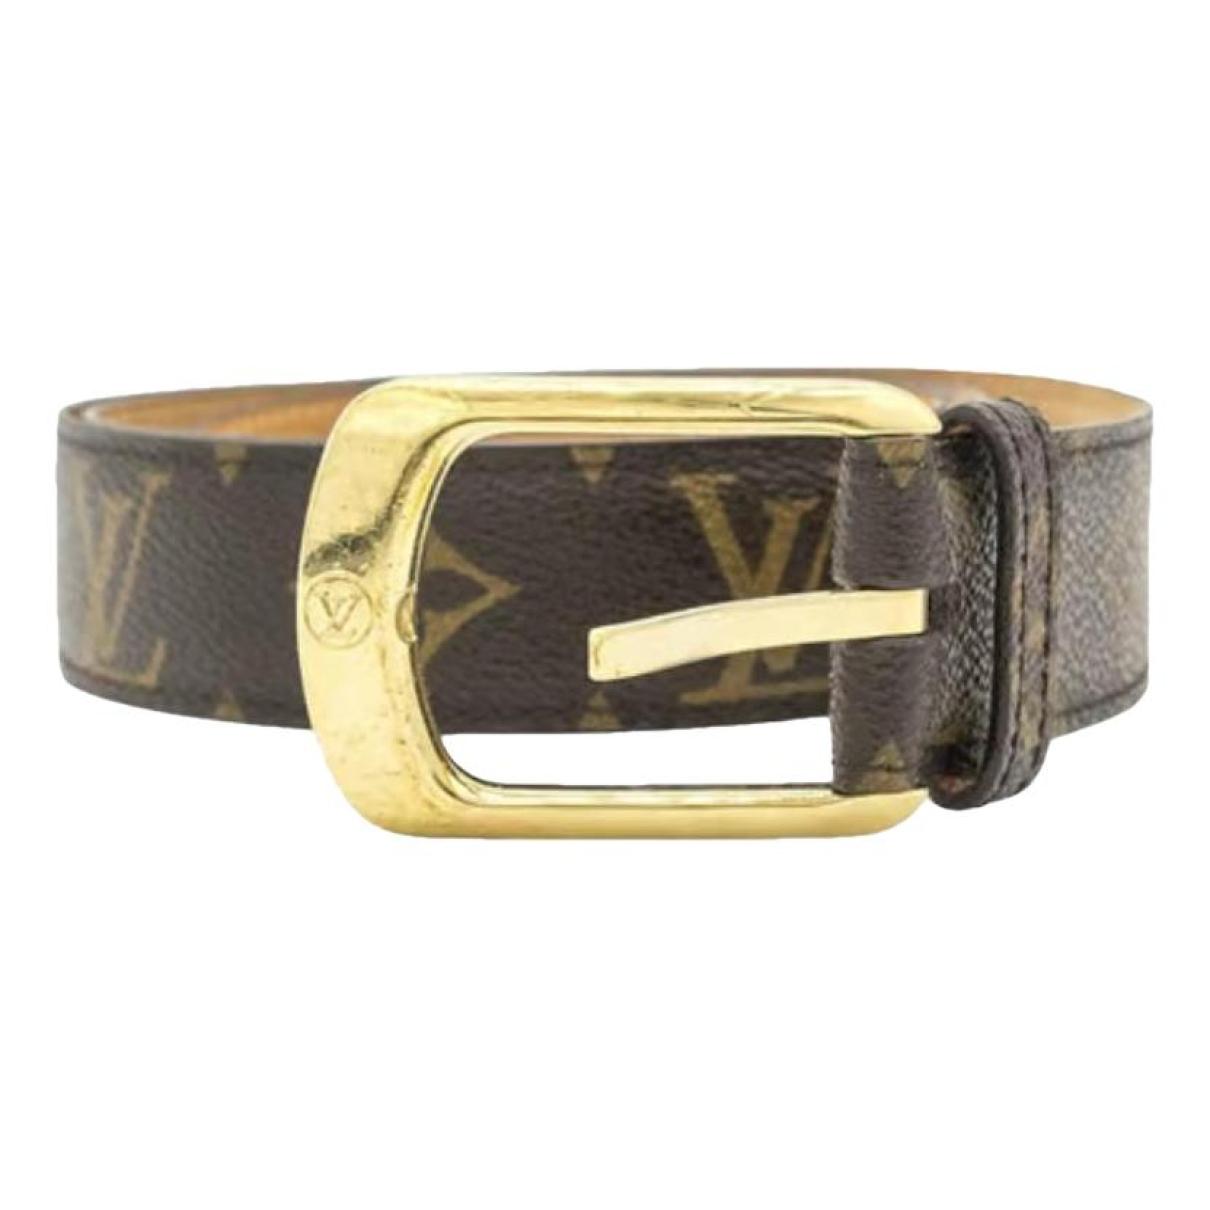 New wave leather belt Louis Vuitton Brown size 85 cm in Leather - 32608953